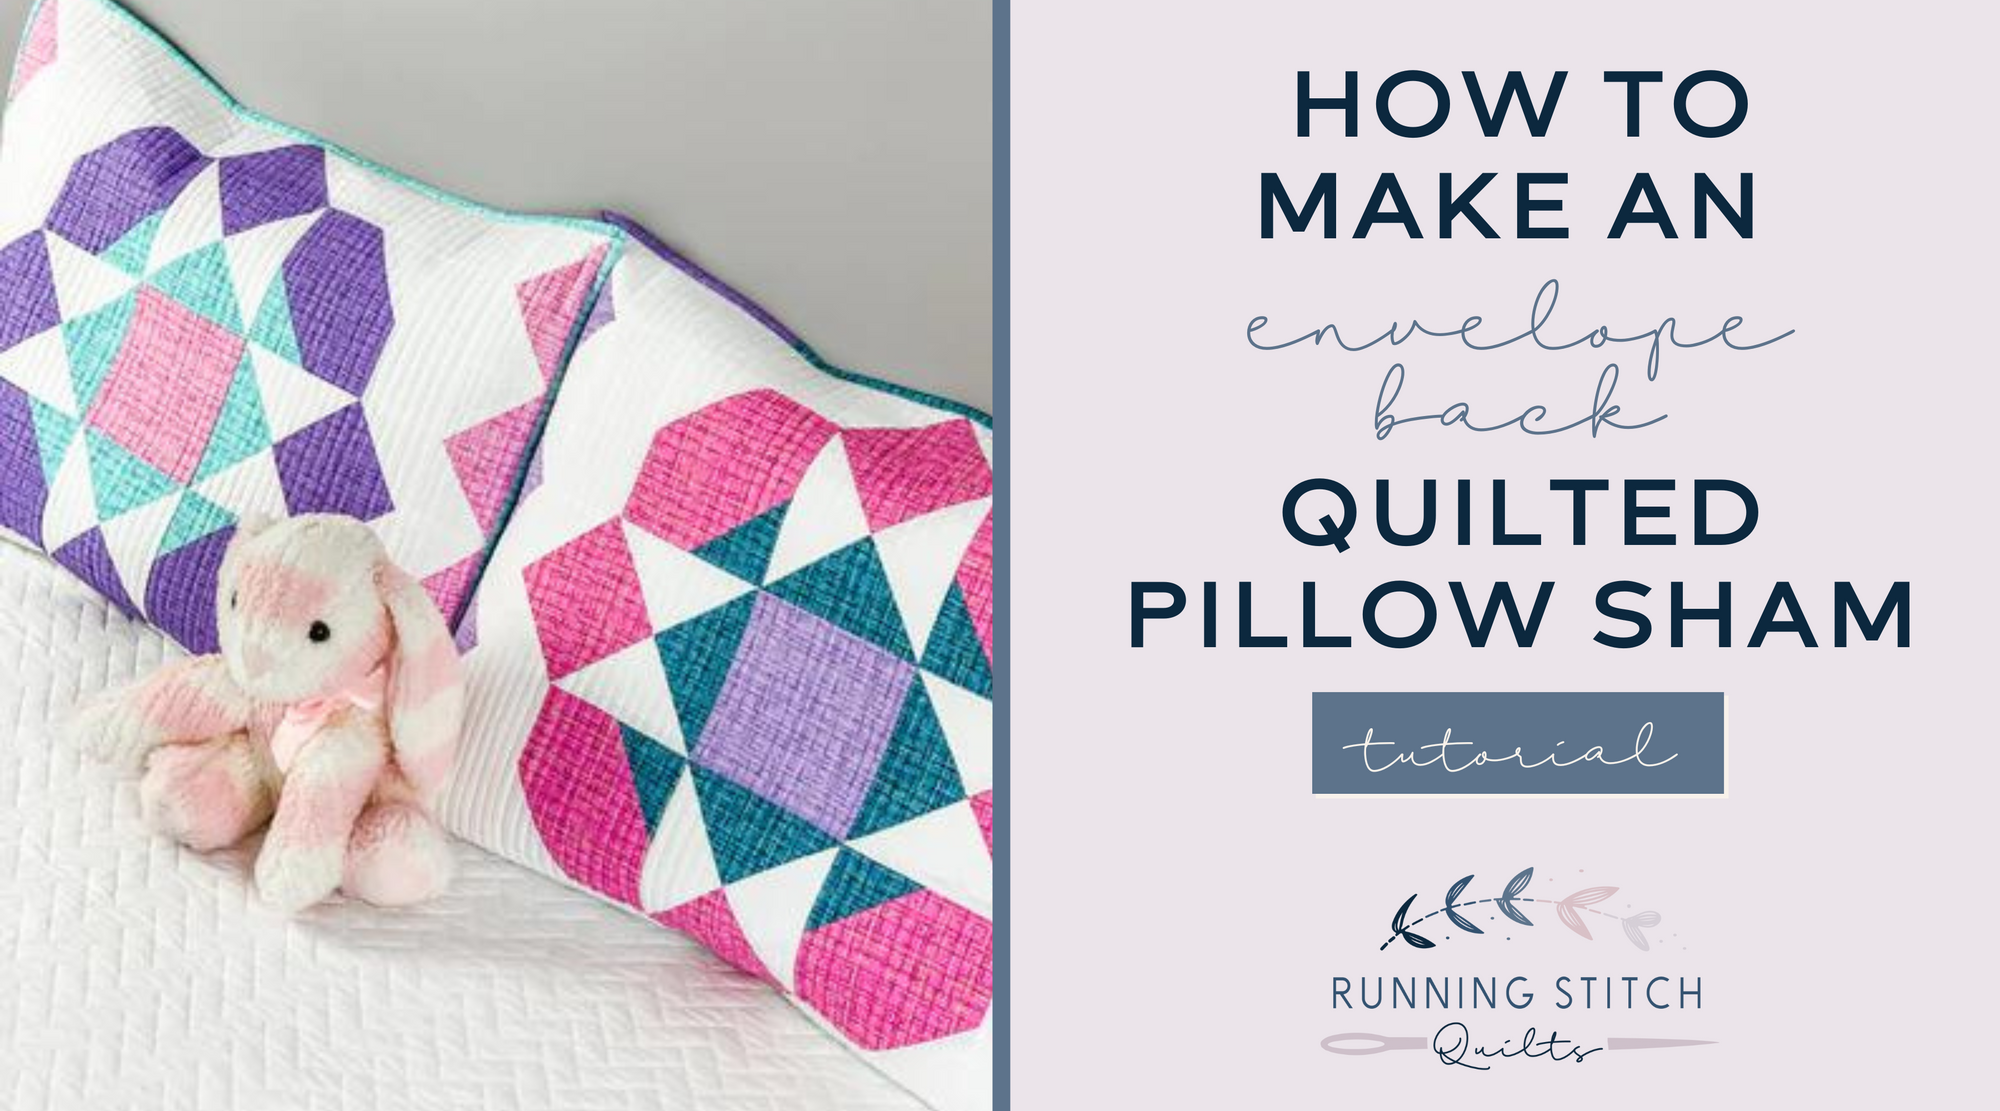 How to Make an Envelope Back Quilted Pillow Sham